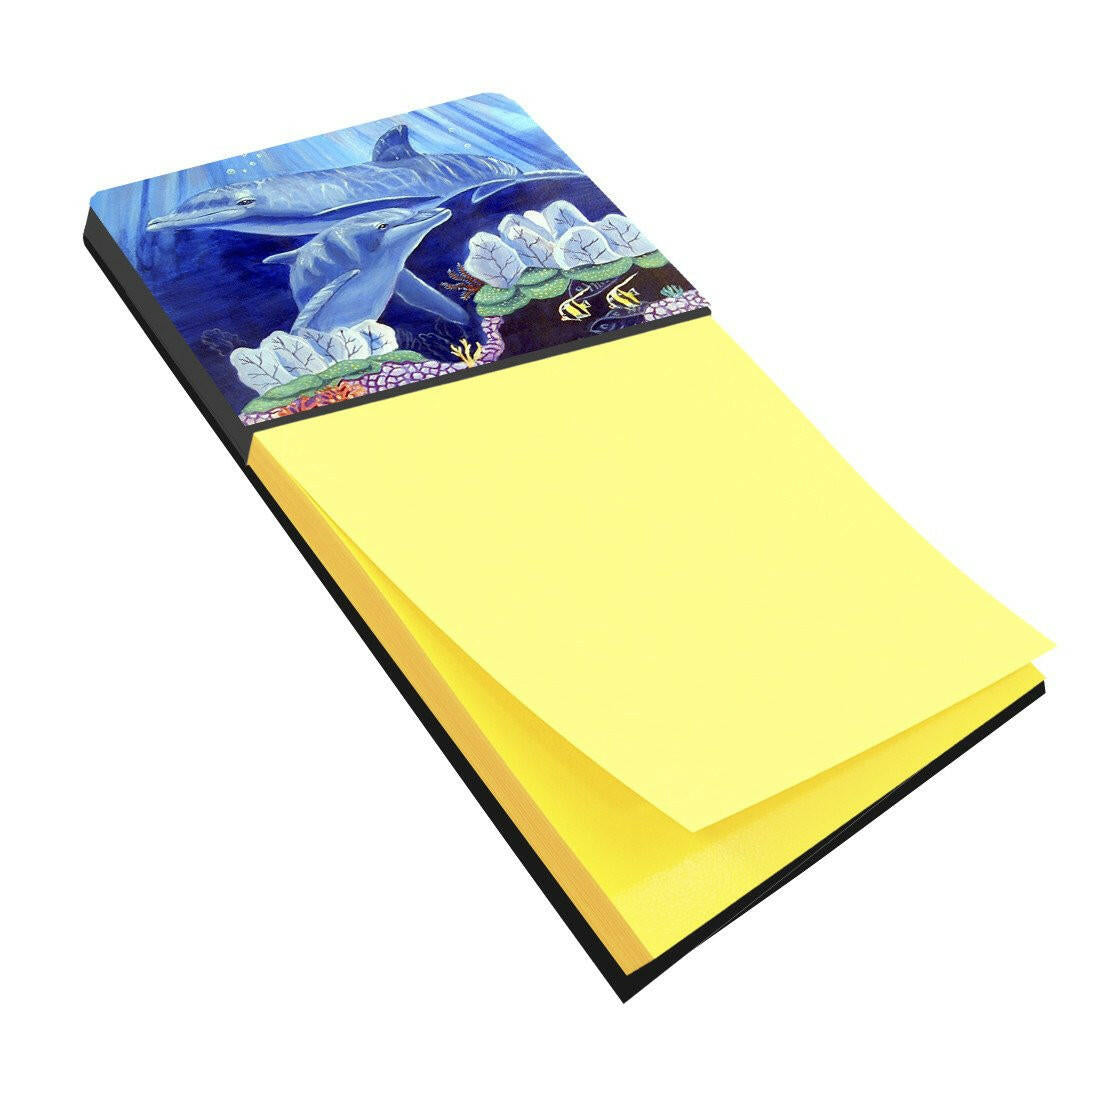 Dolphin under the sea Refiillable Sticky Note Holder or Postit Note Dispenser 7080SN by Caroline's Treasures